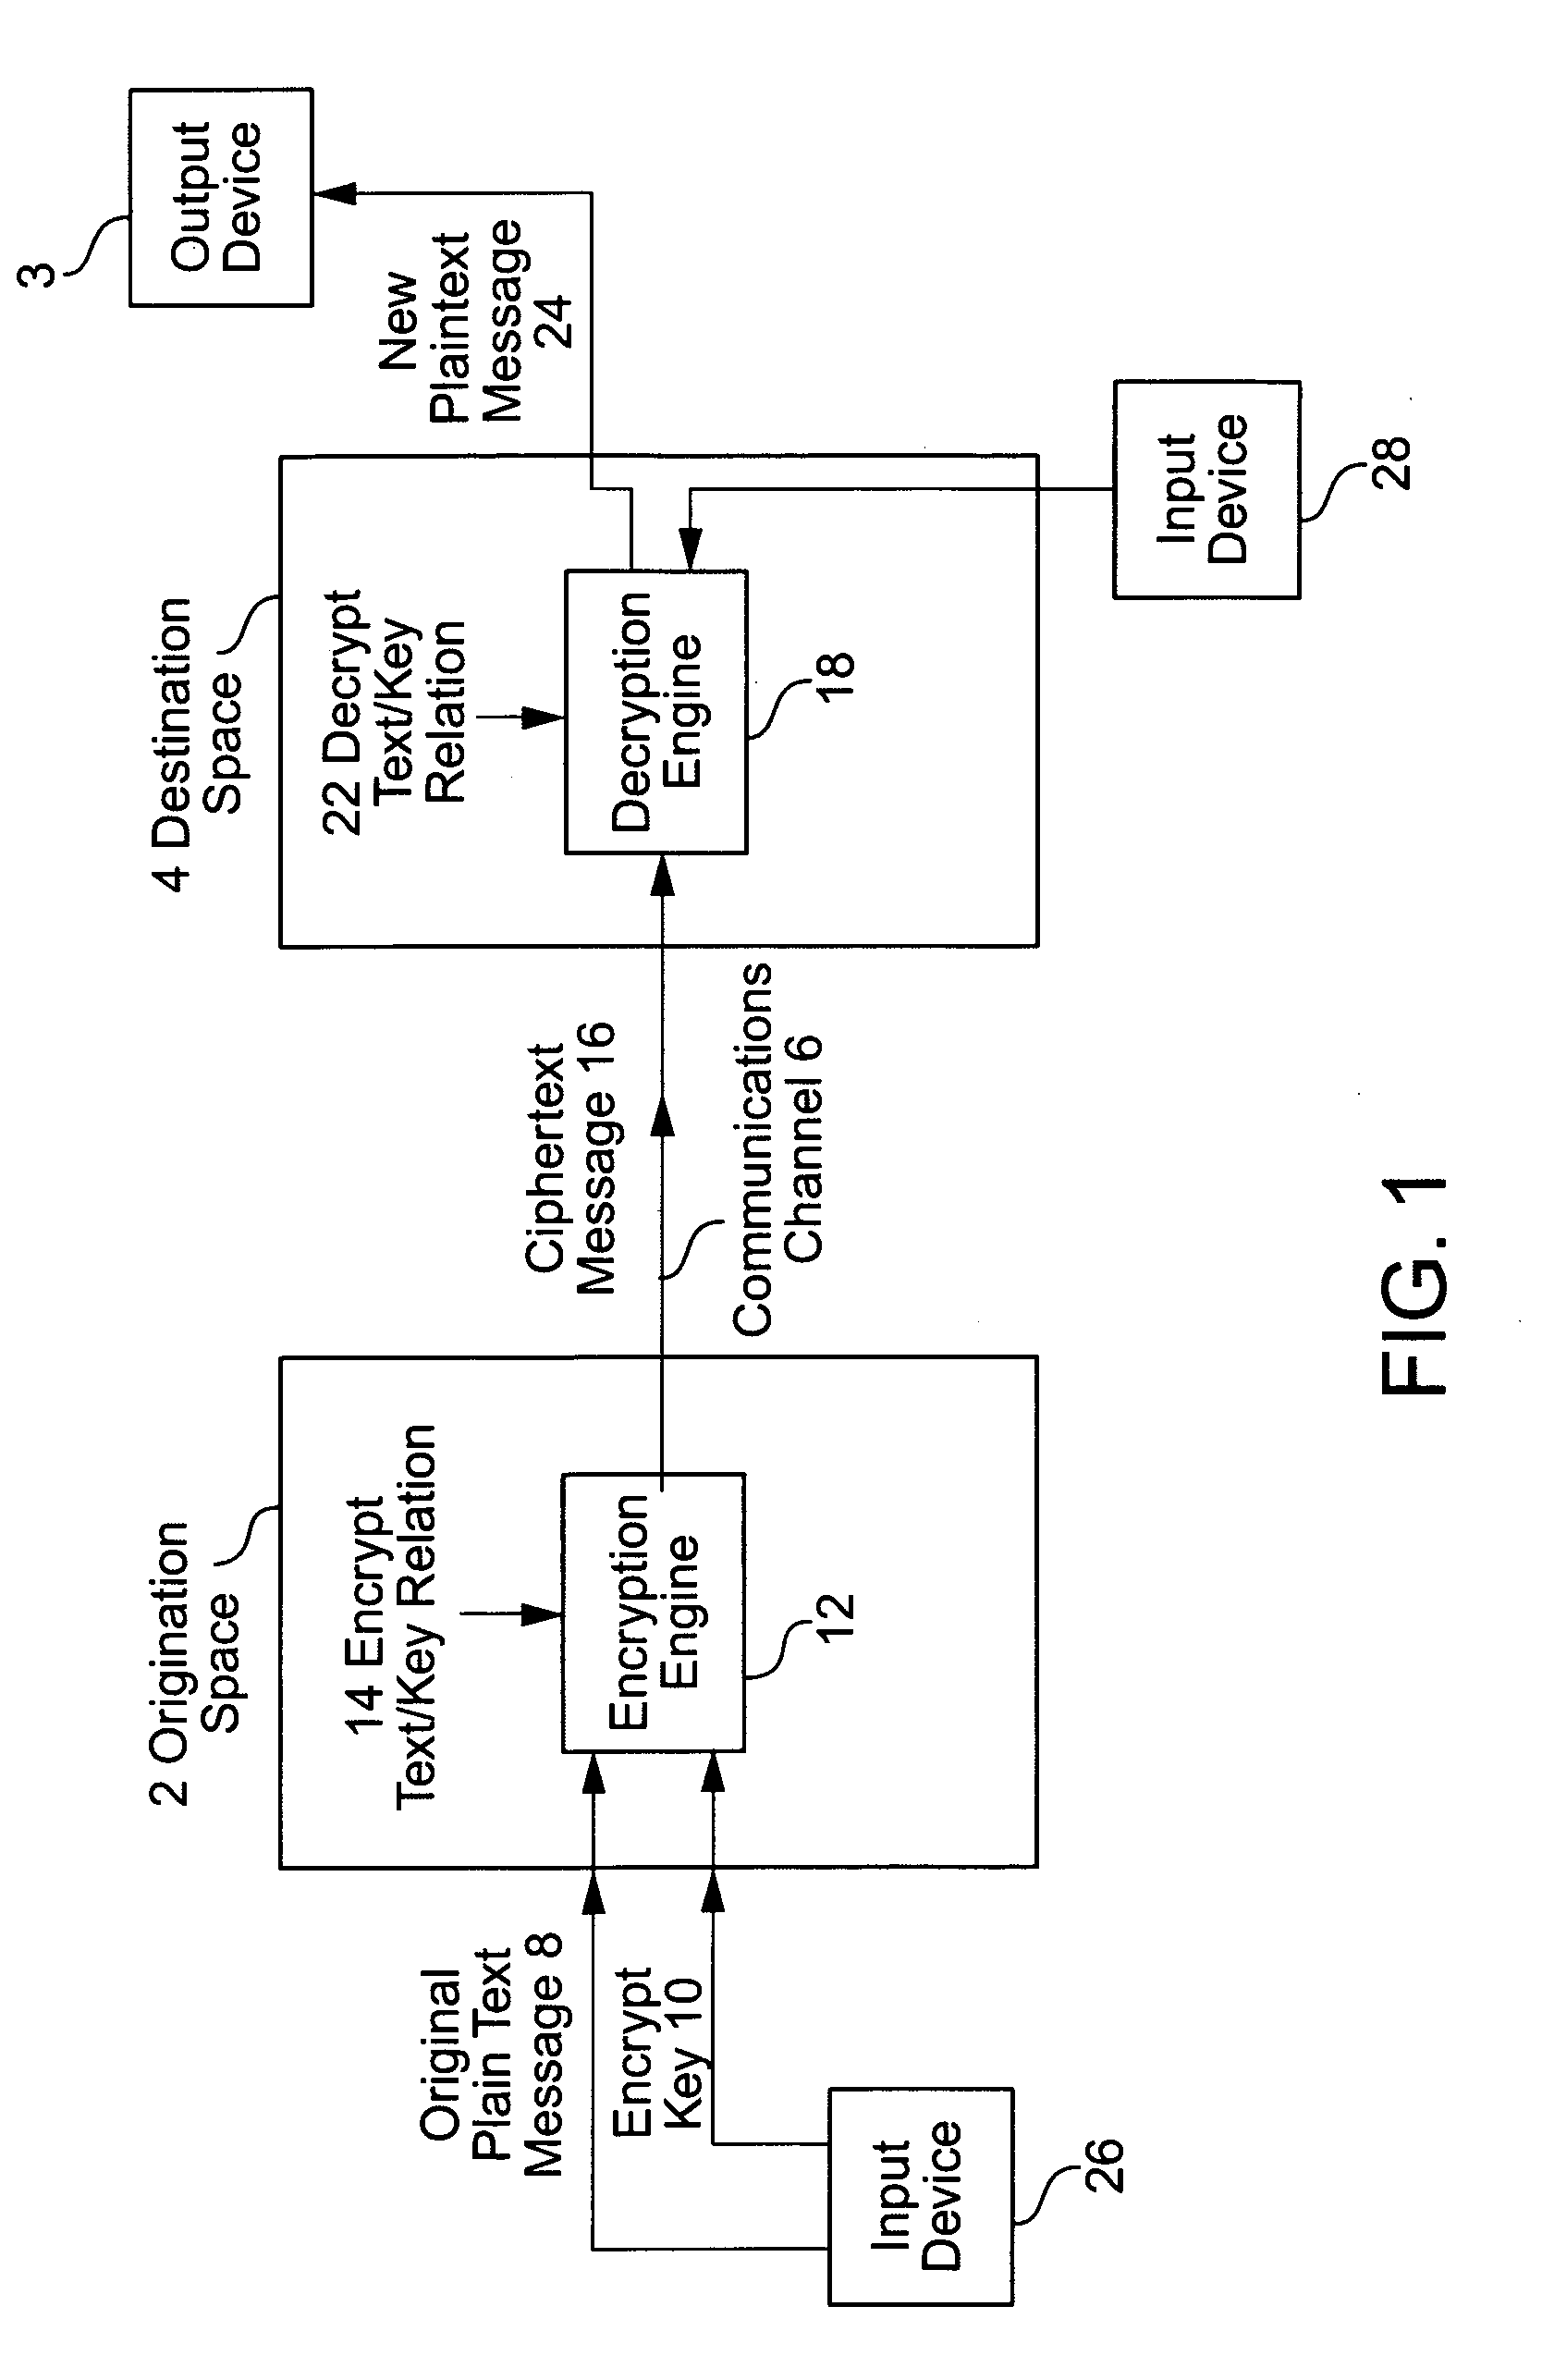 Cryptographic key split binder for use with tagged data elements